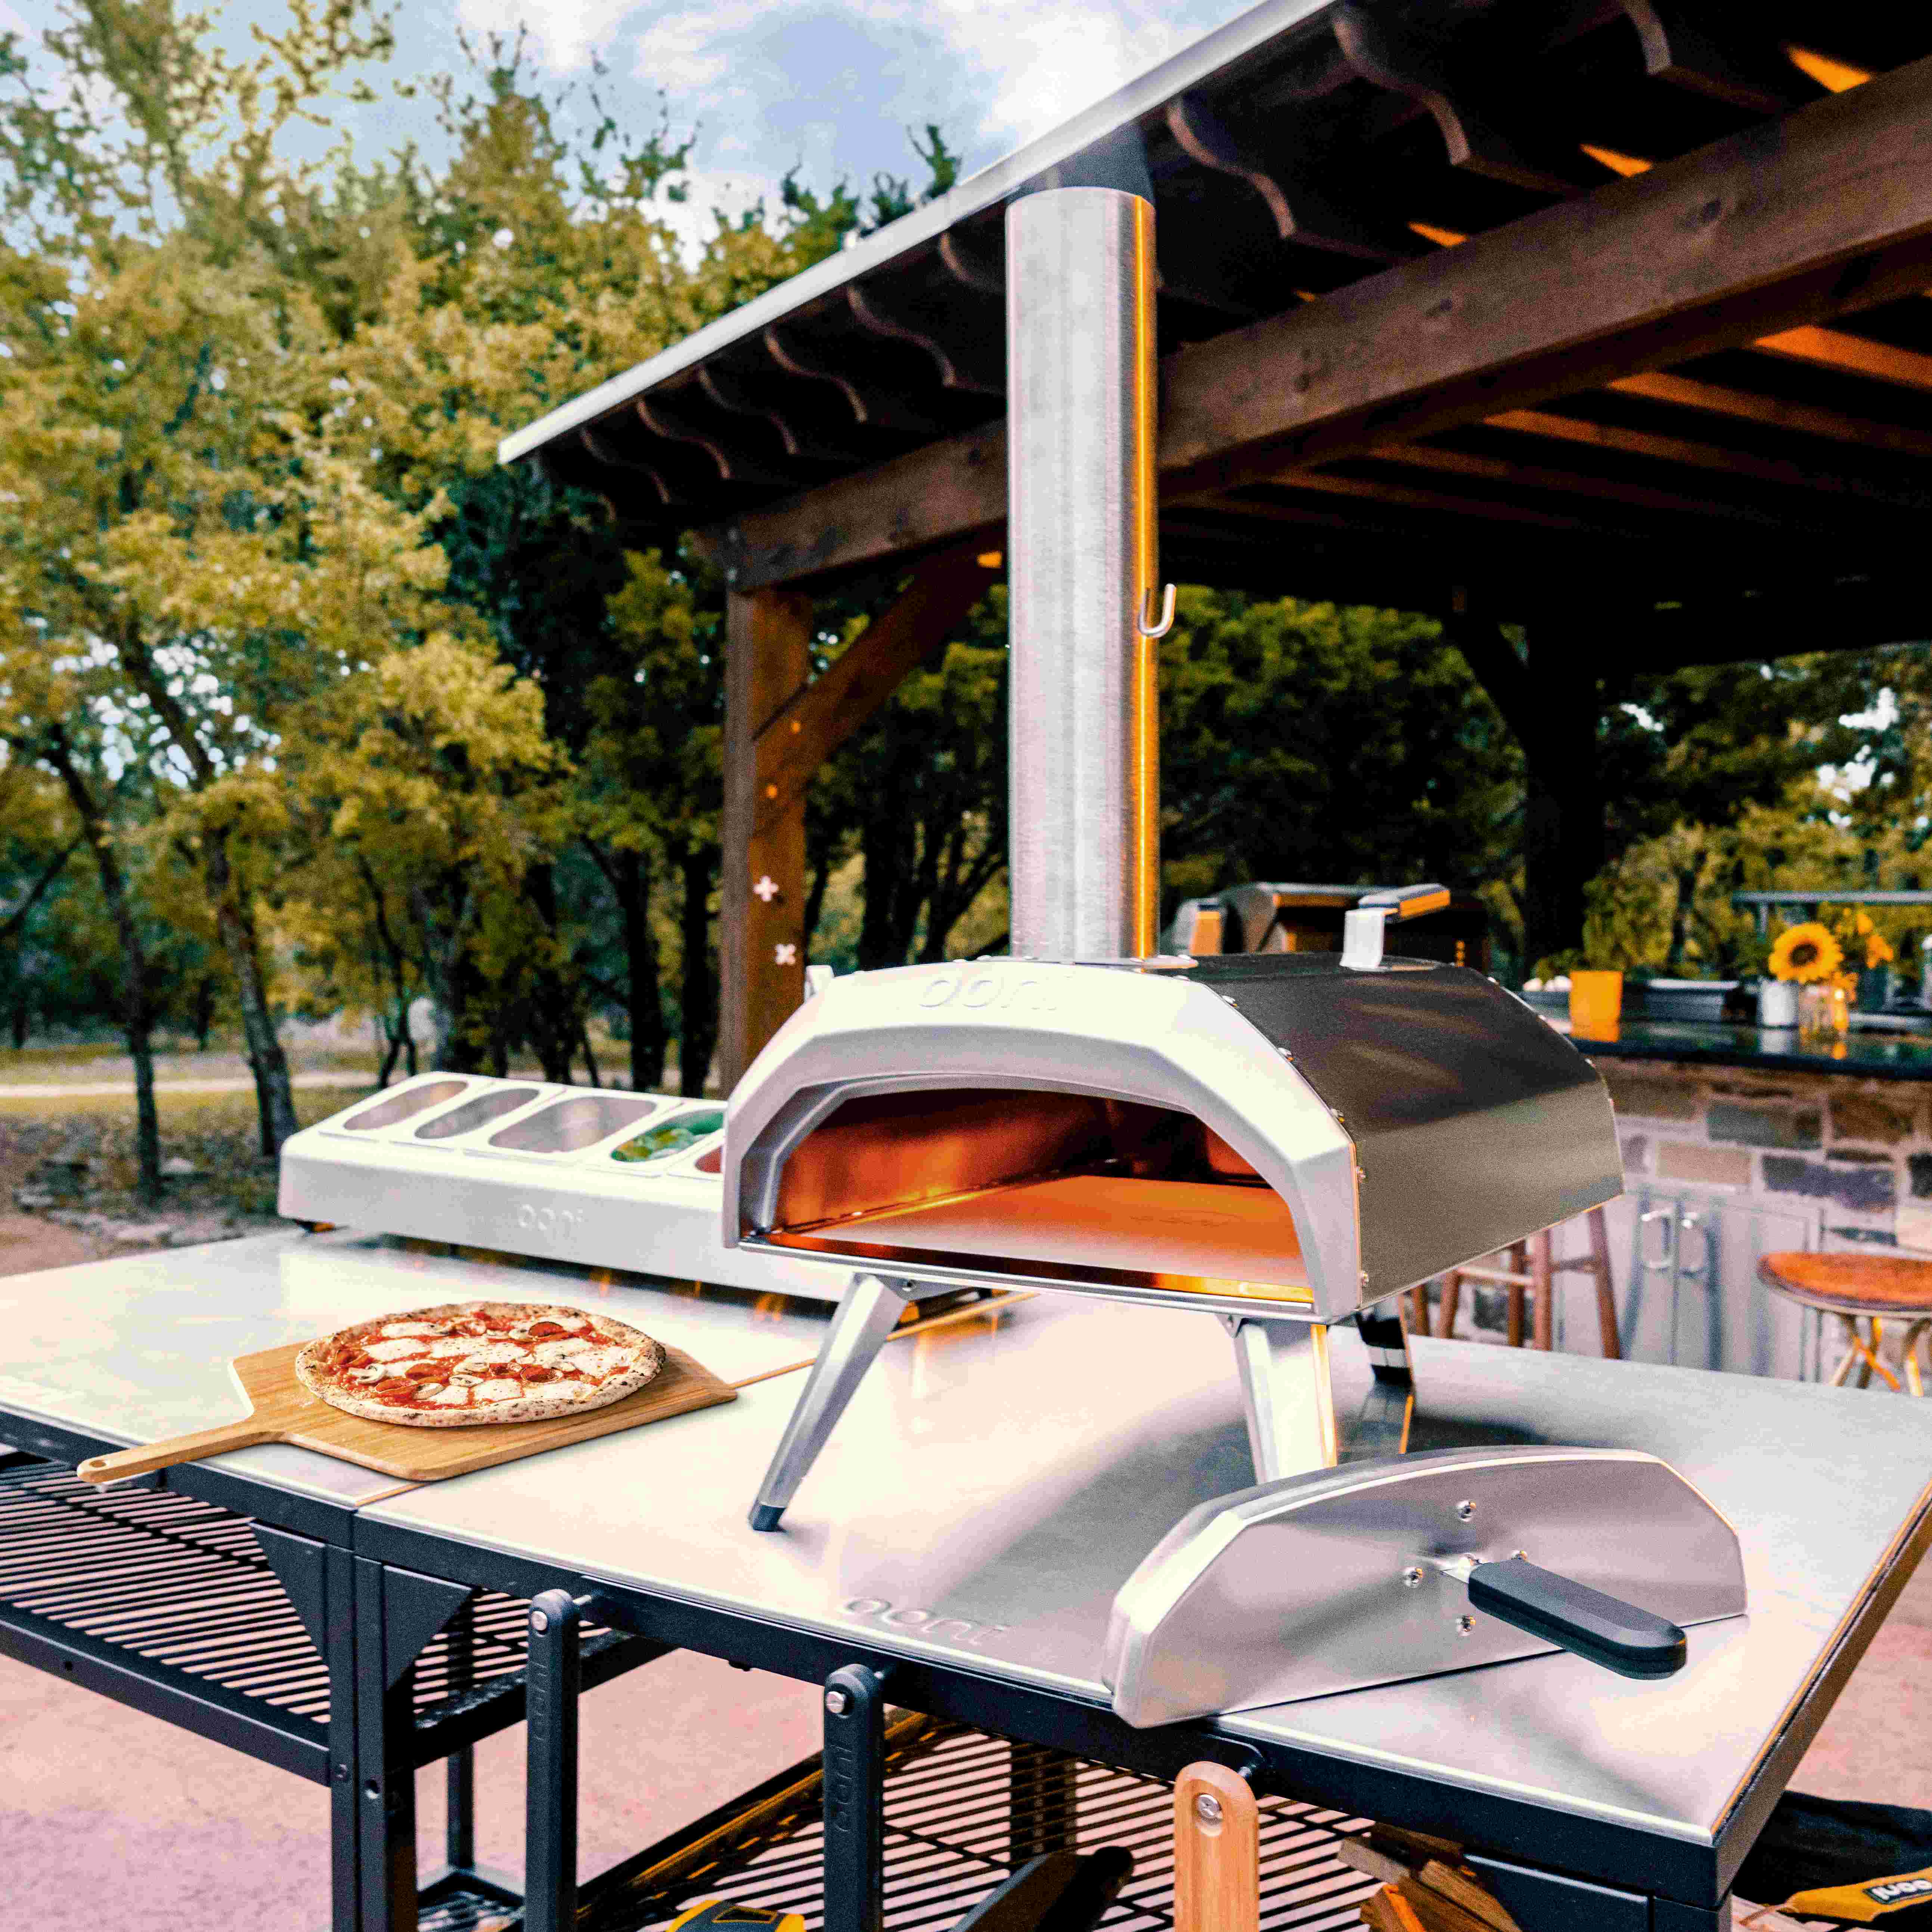 Ooni Pizza Ovens, Emigh Ace Hardware